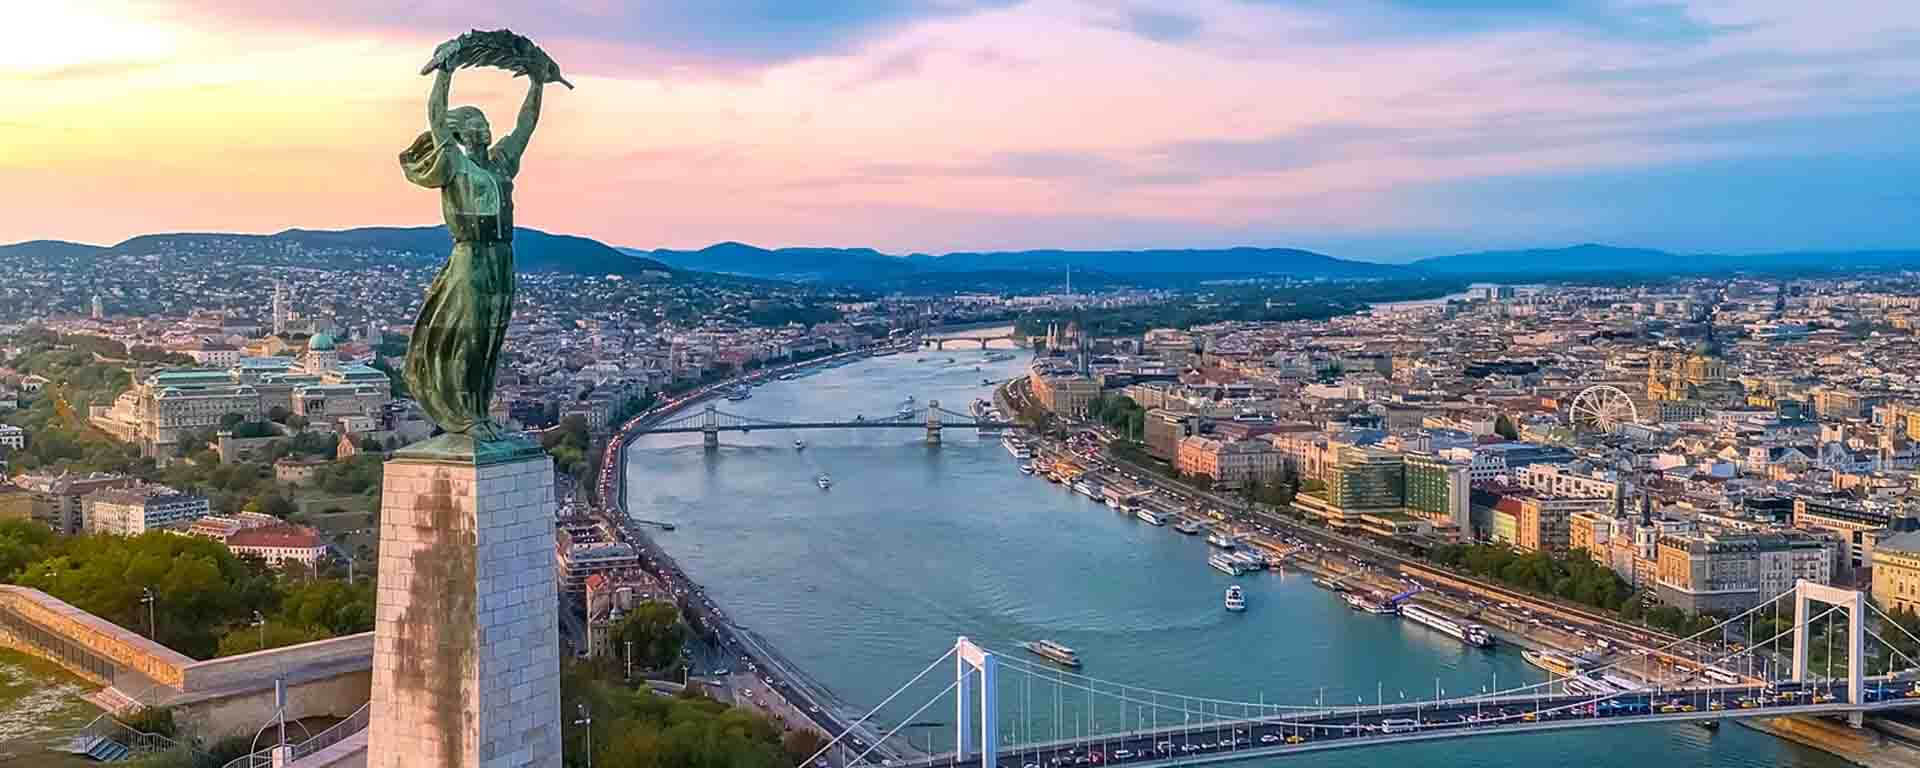 Hungary Tourist Attractions